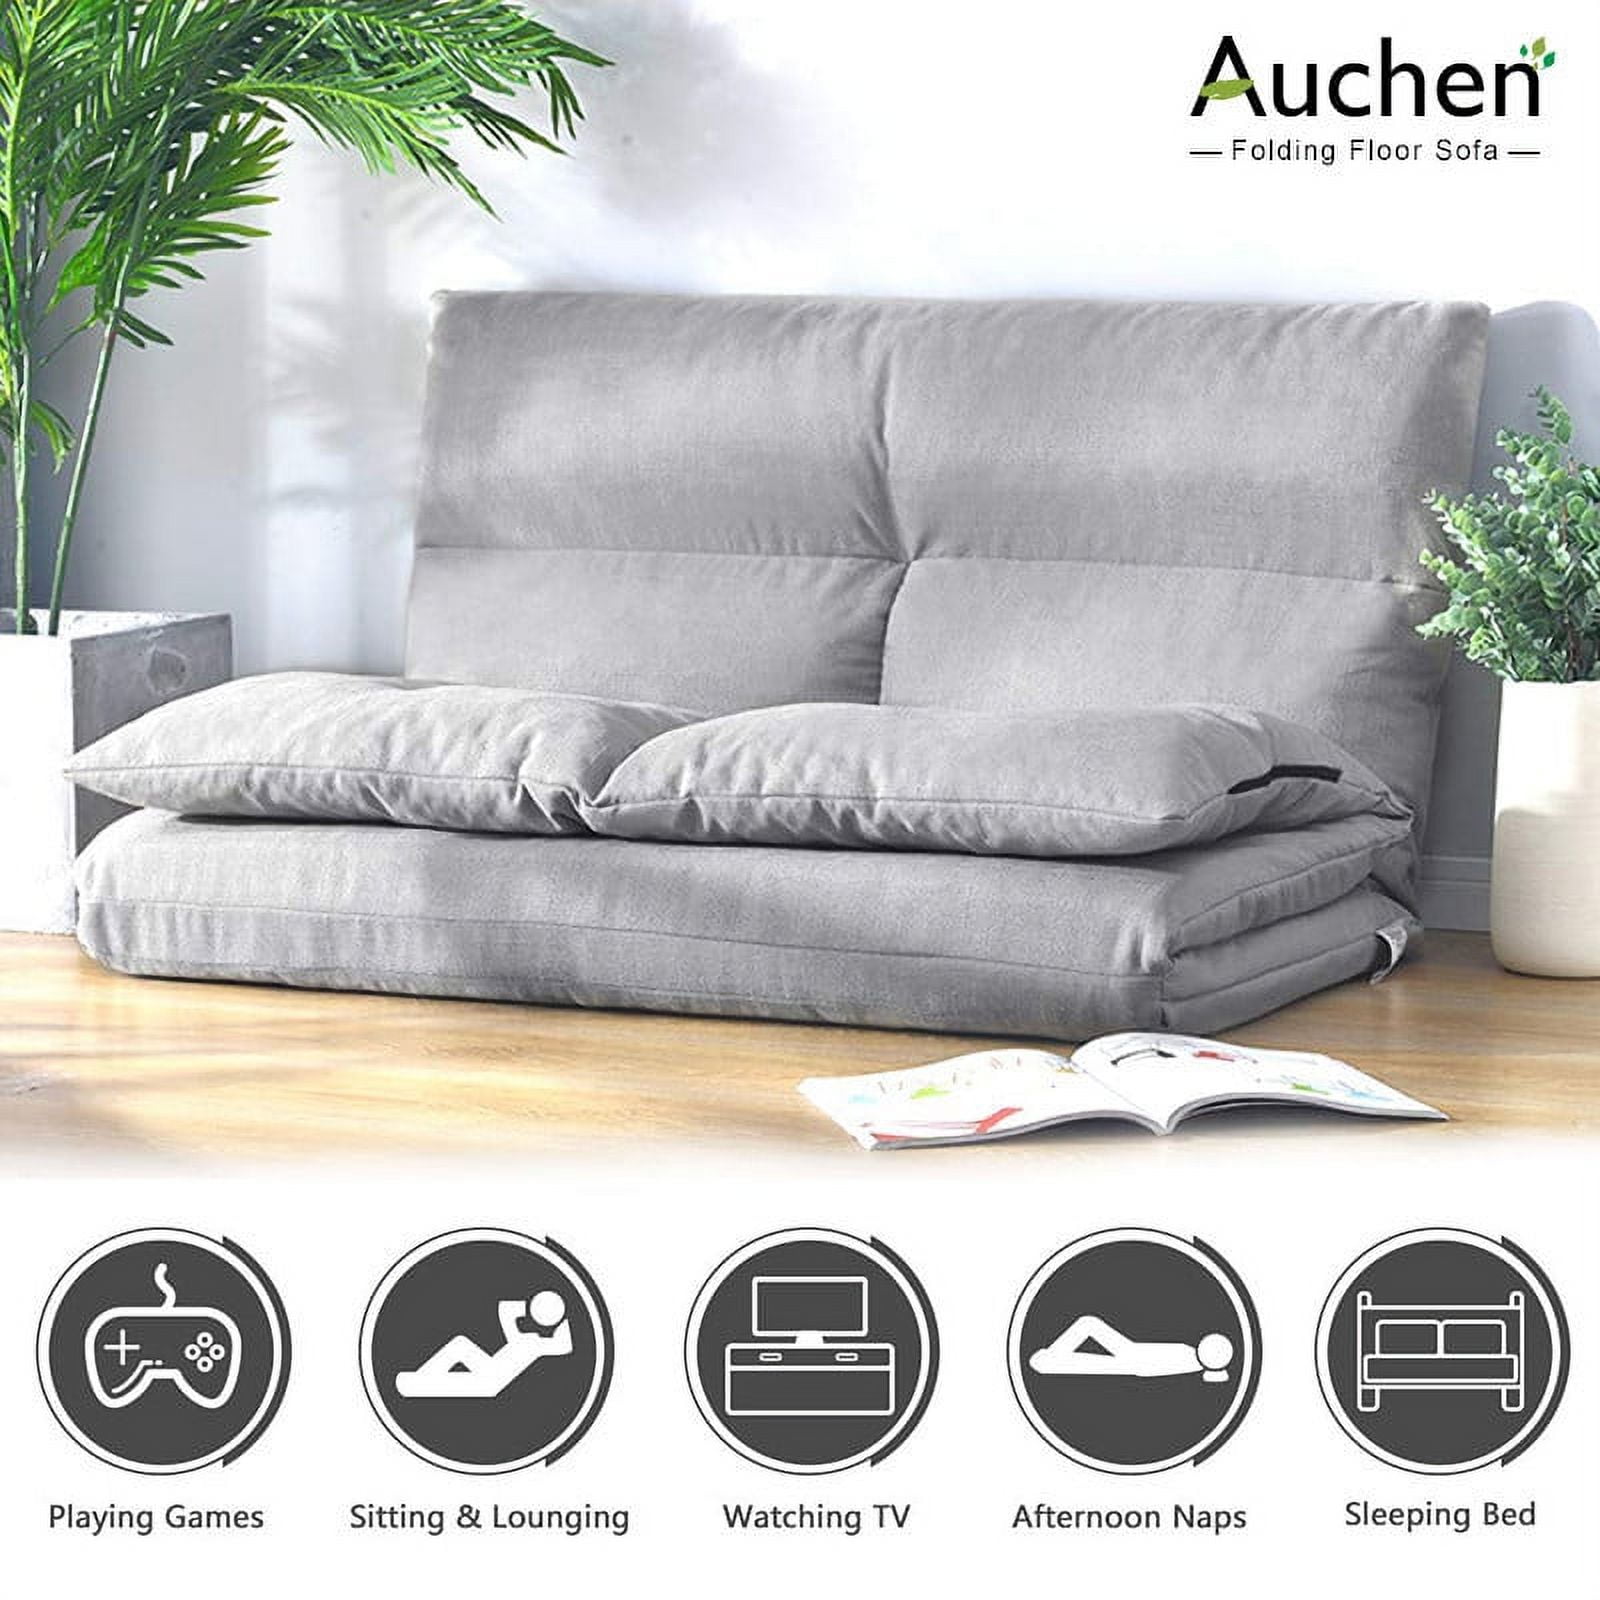 HomeProtect Couch Cushion Support for Sagging Cushions : Under Couch Cushion Replacement - Couch Saver for Sagging Furniture 66x17extra Thick ABS Boar